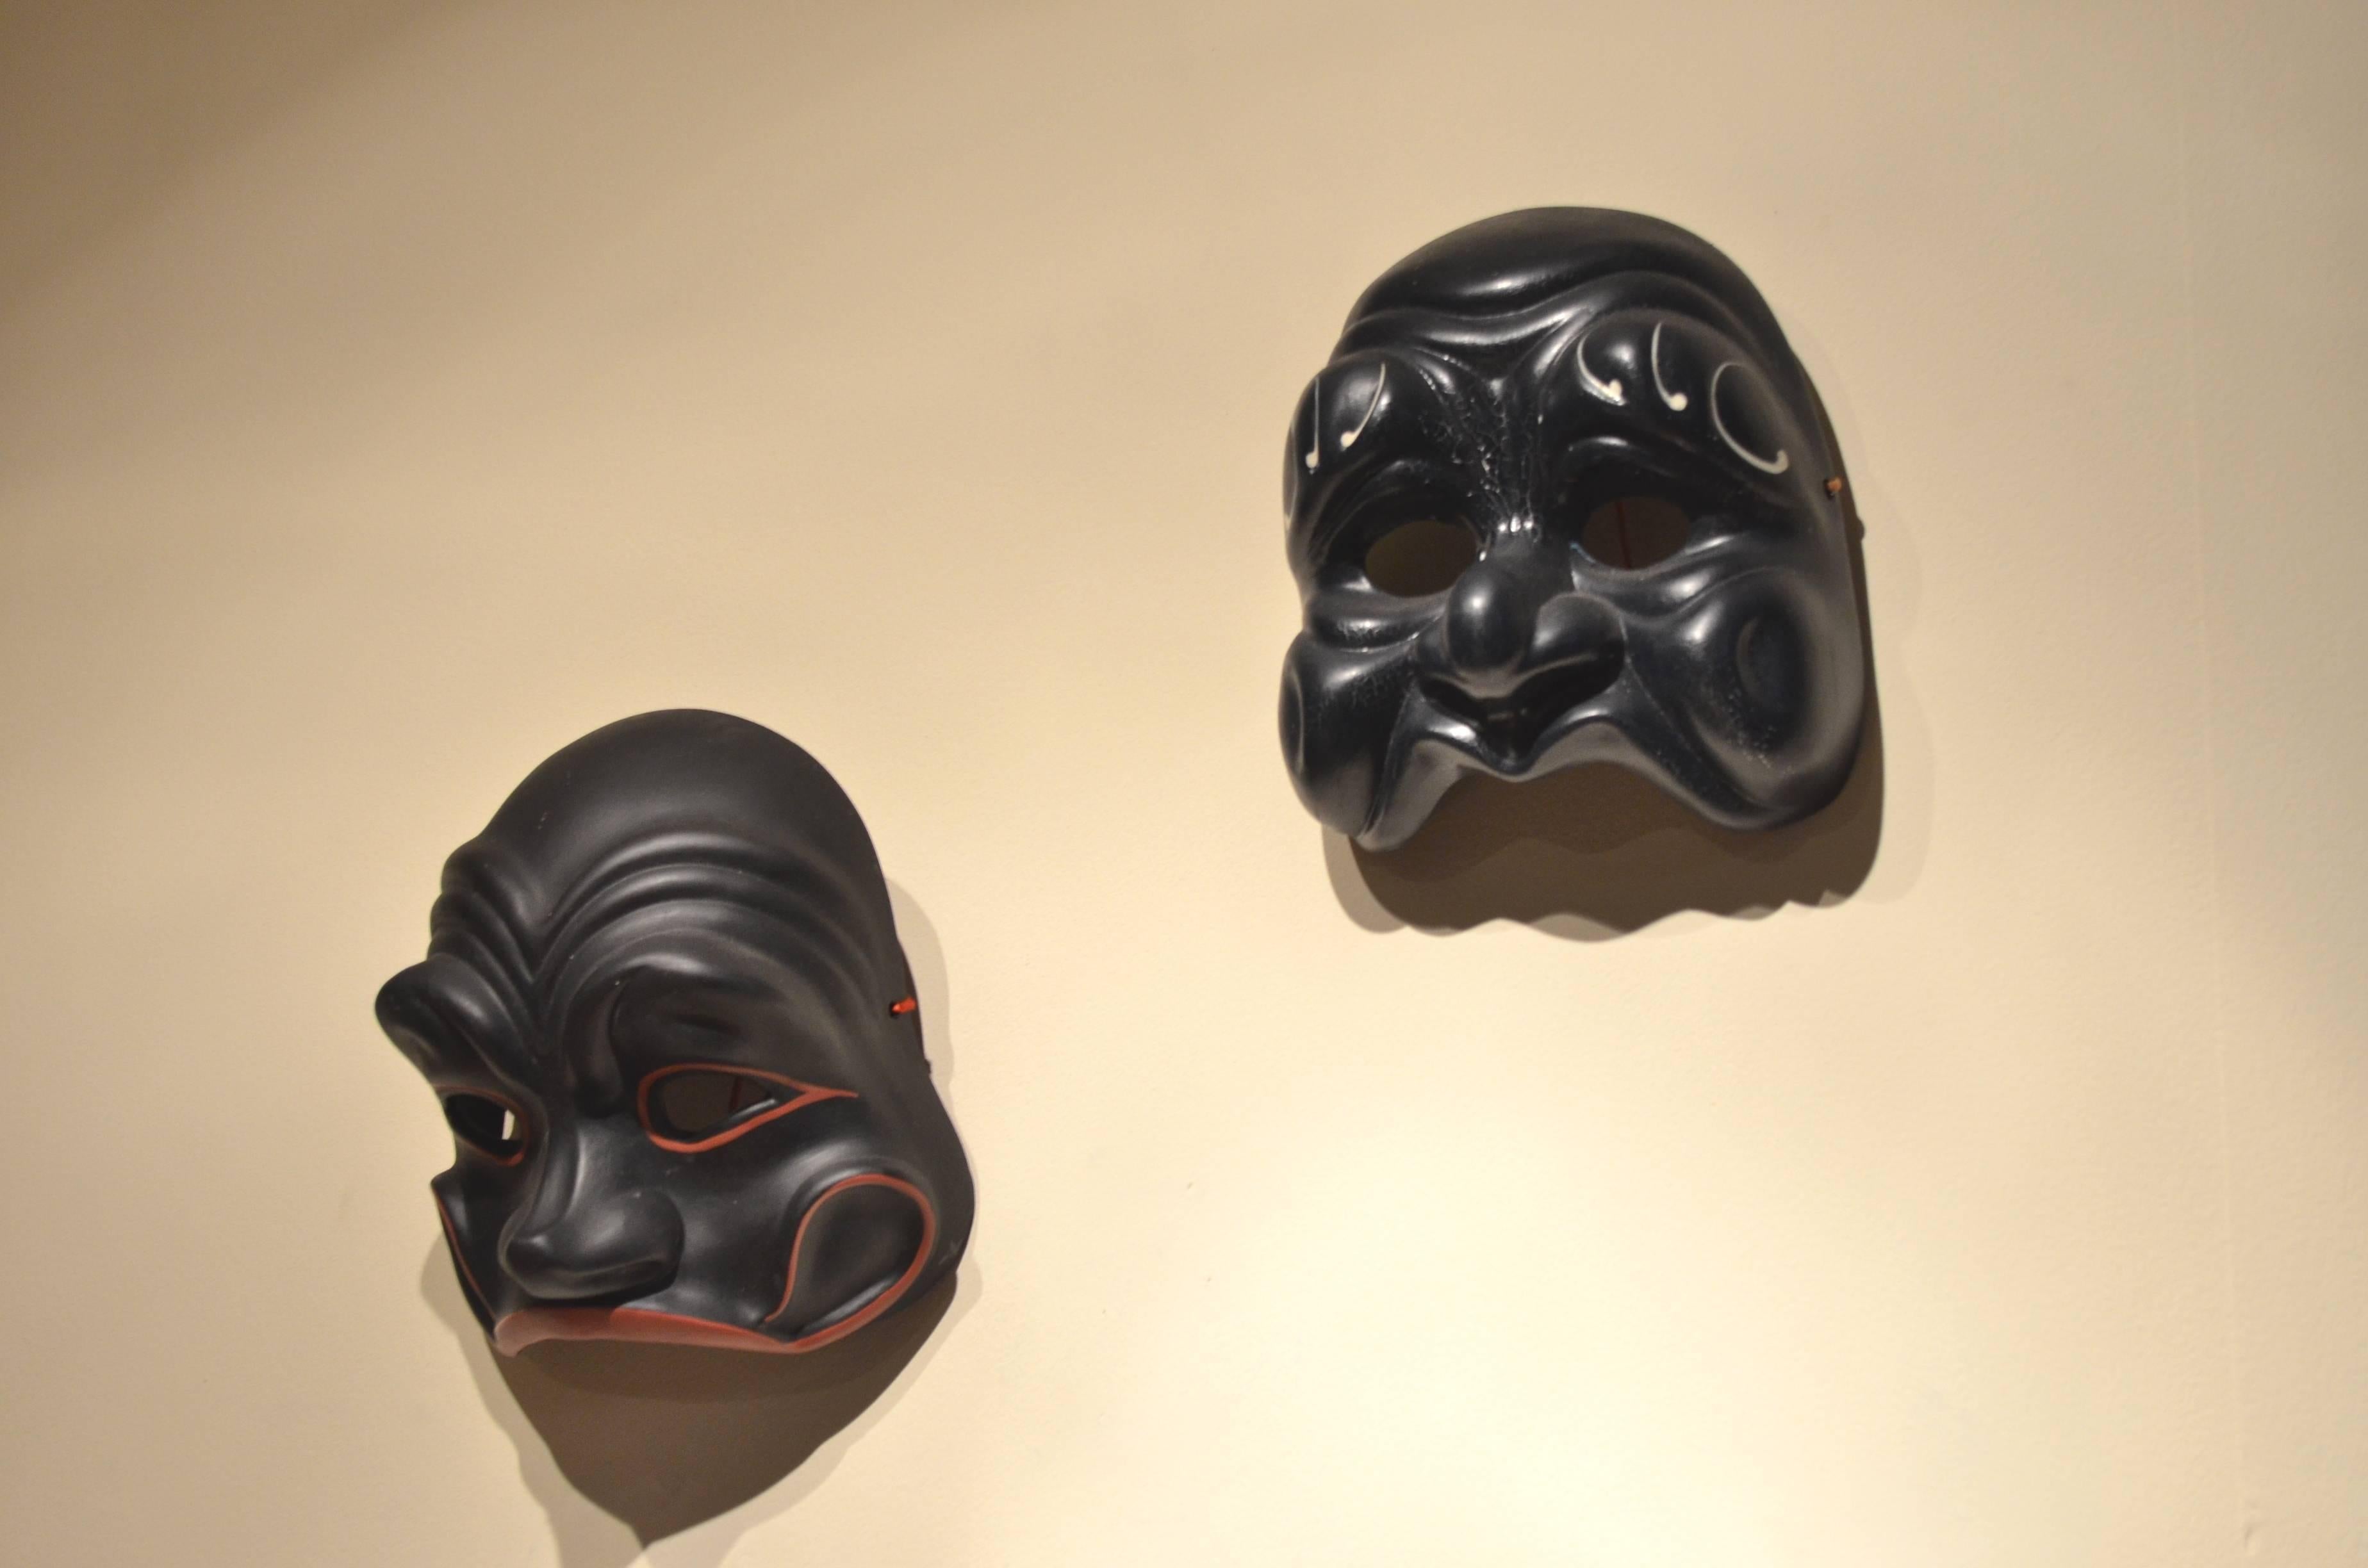 Collection of 11x Venetian masks made in plaster. The collection is composed of : 
- 2x Bauta masks, one in Black and the other in White, 
- 1 x Red Clay coloured Pulcinella mask with angry expression 
- 1 x White female Arlecchino mask, with